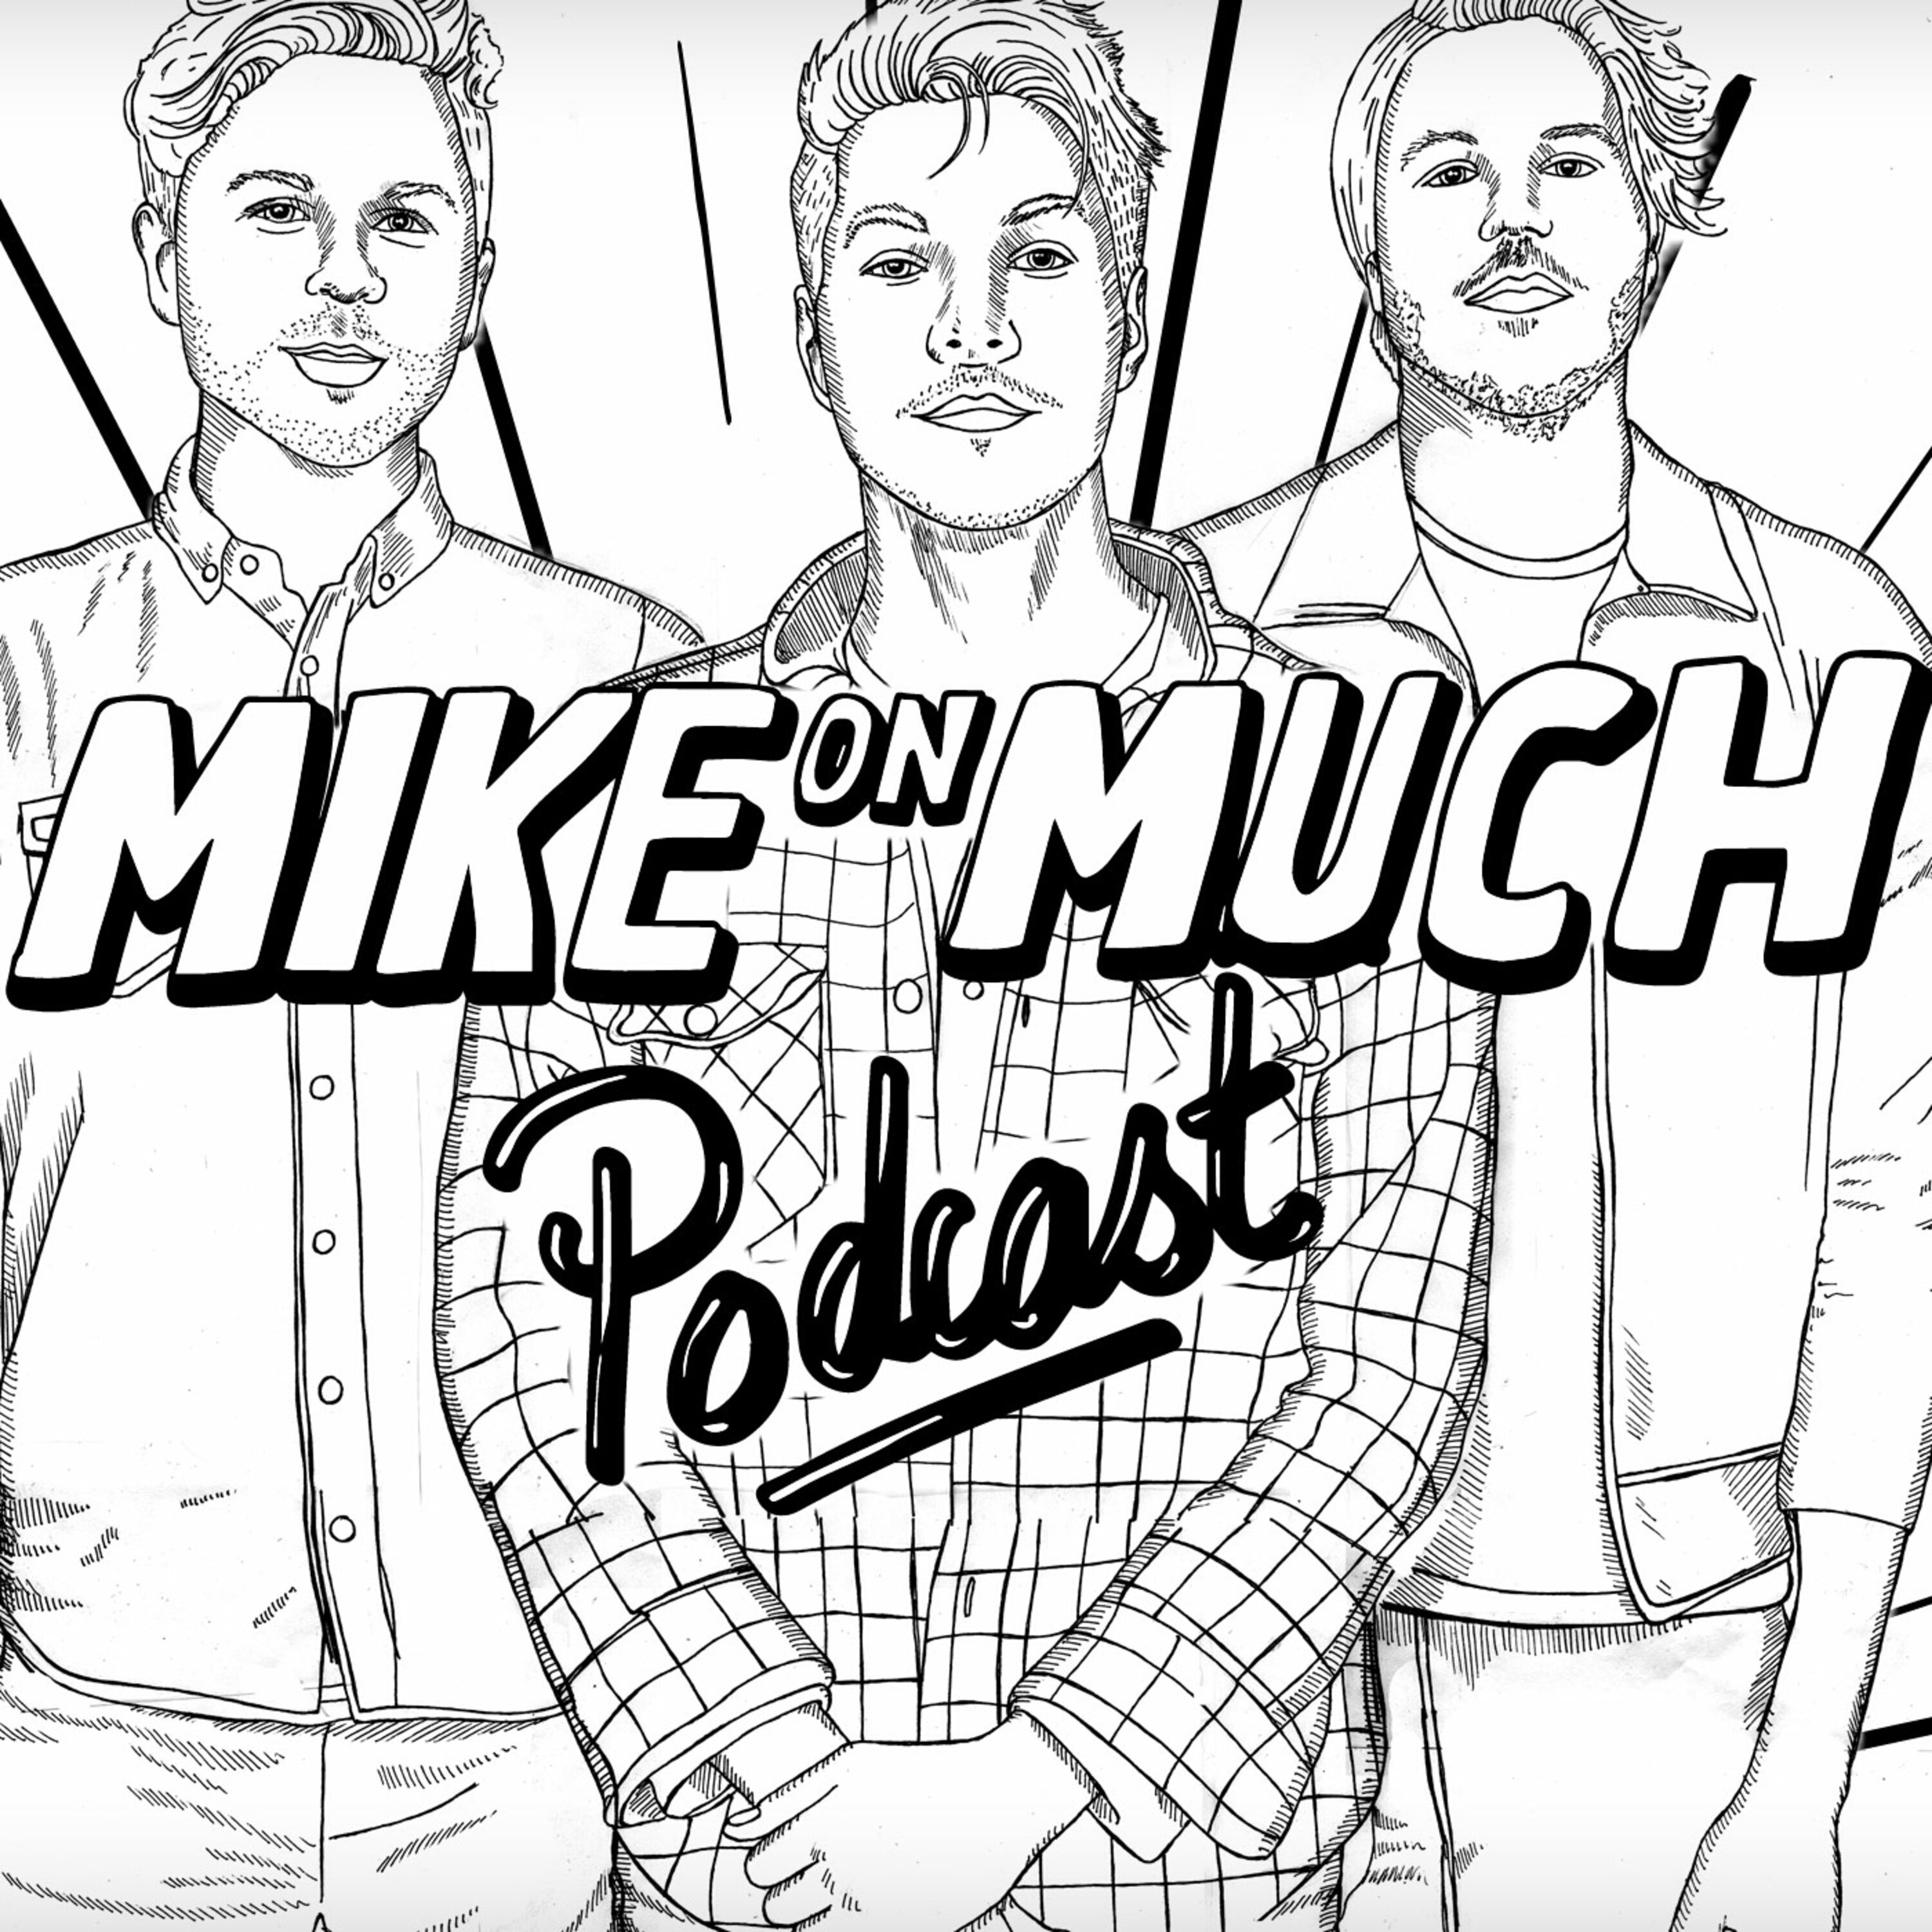 Season 1 Mike On Much: Jessie Gaskell and Mike Sweeney (#130)